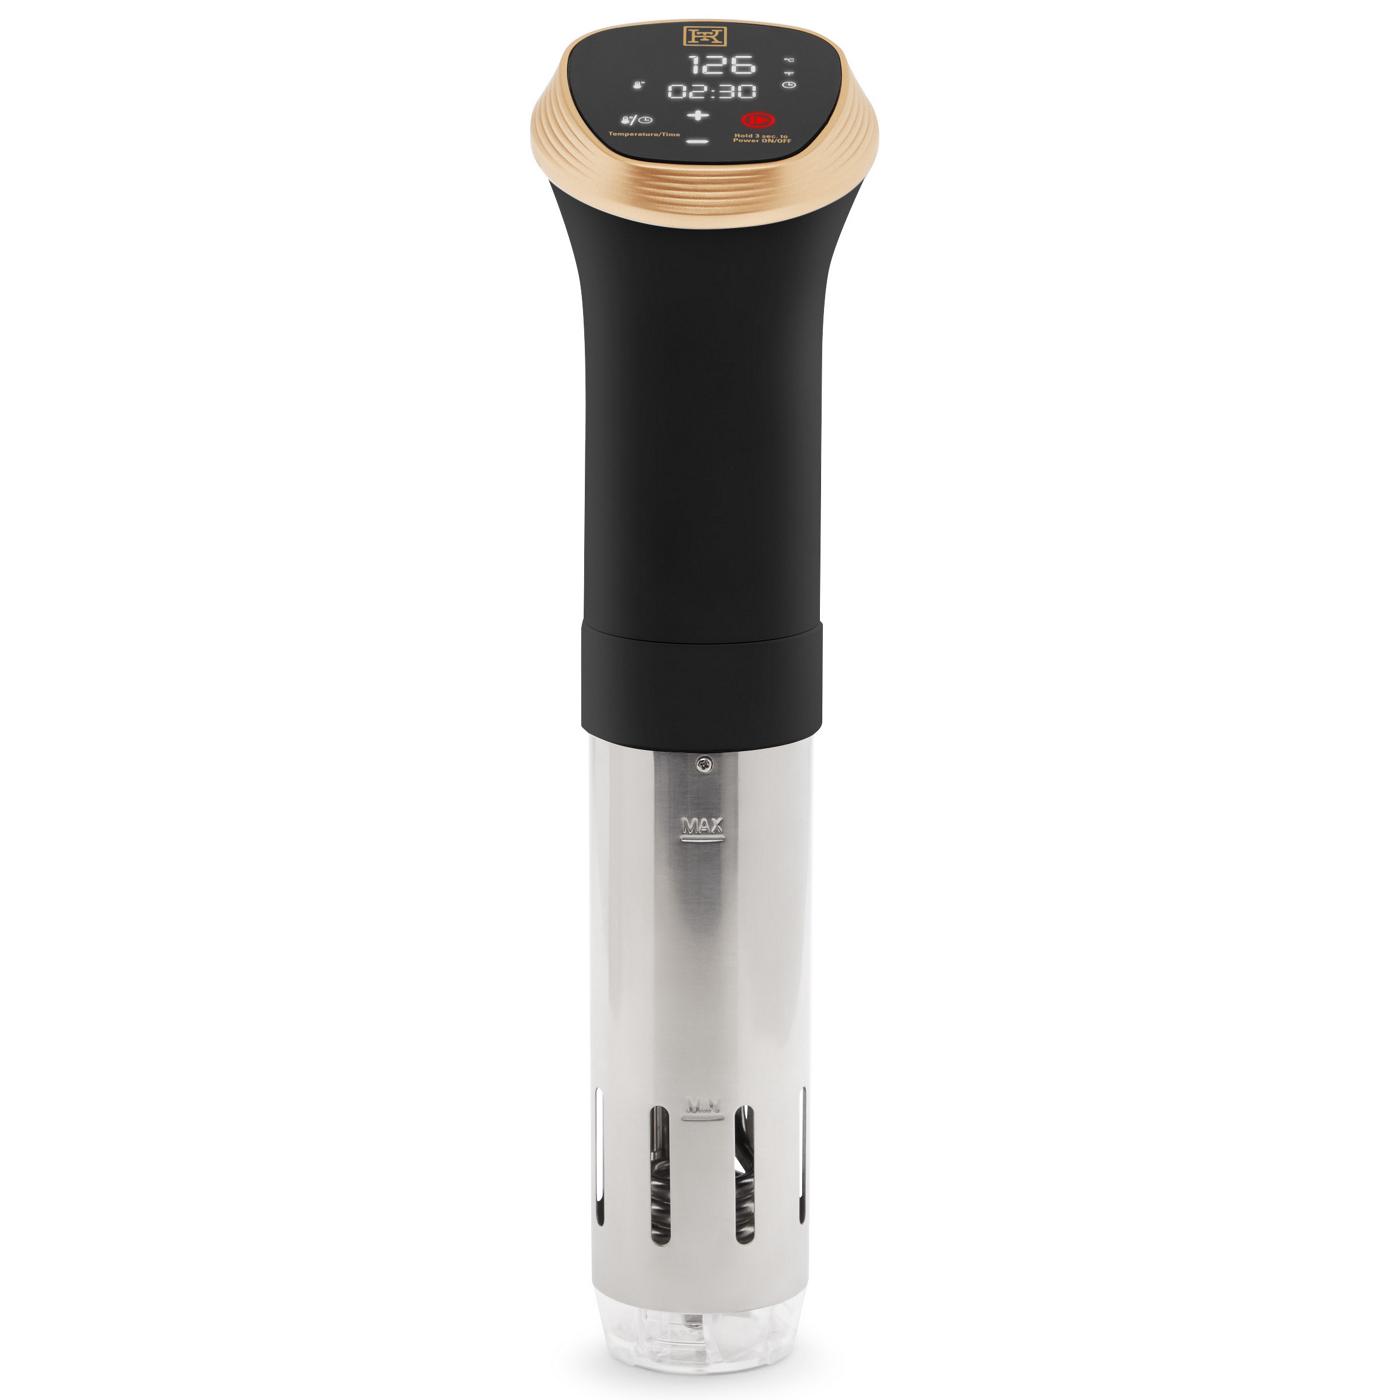 Kitchen & Table by H-E-B Sous Vide Precision Cooker - Classic Black - Shop  Cookers & Roasters at H-E-B